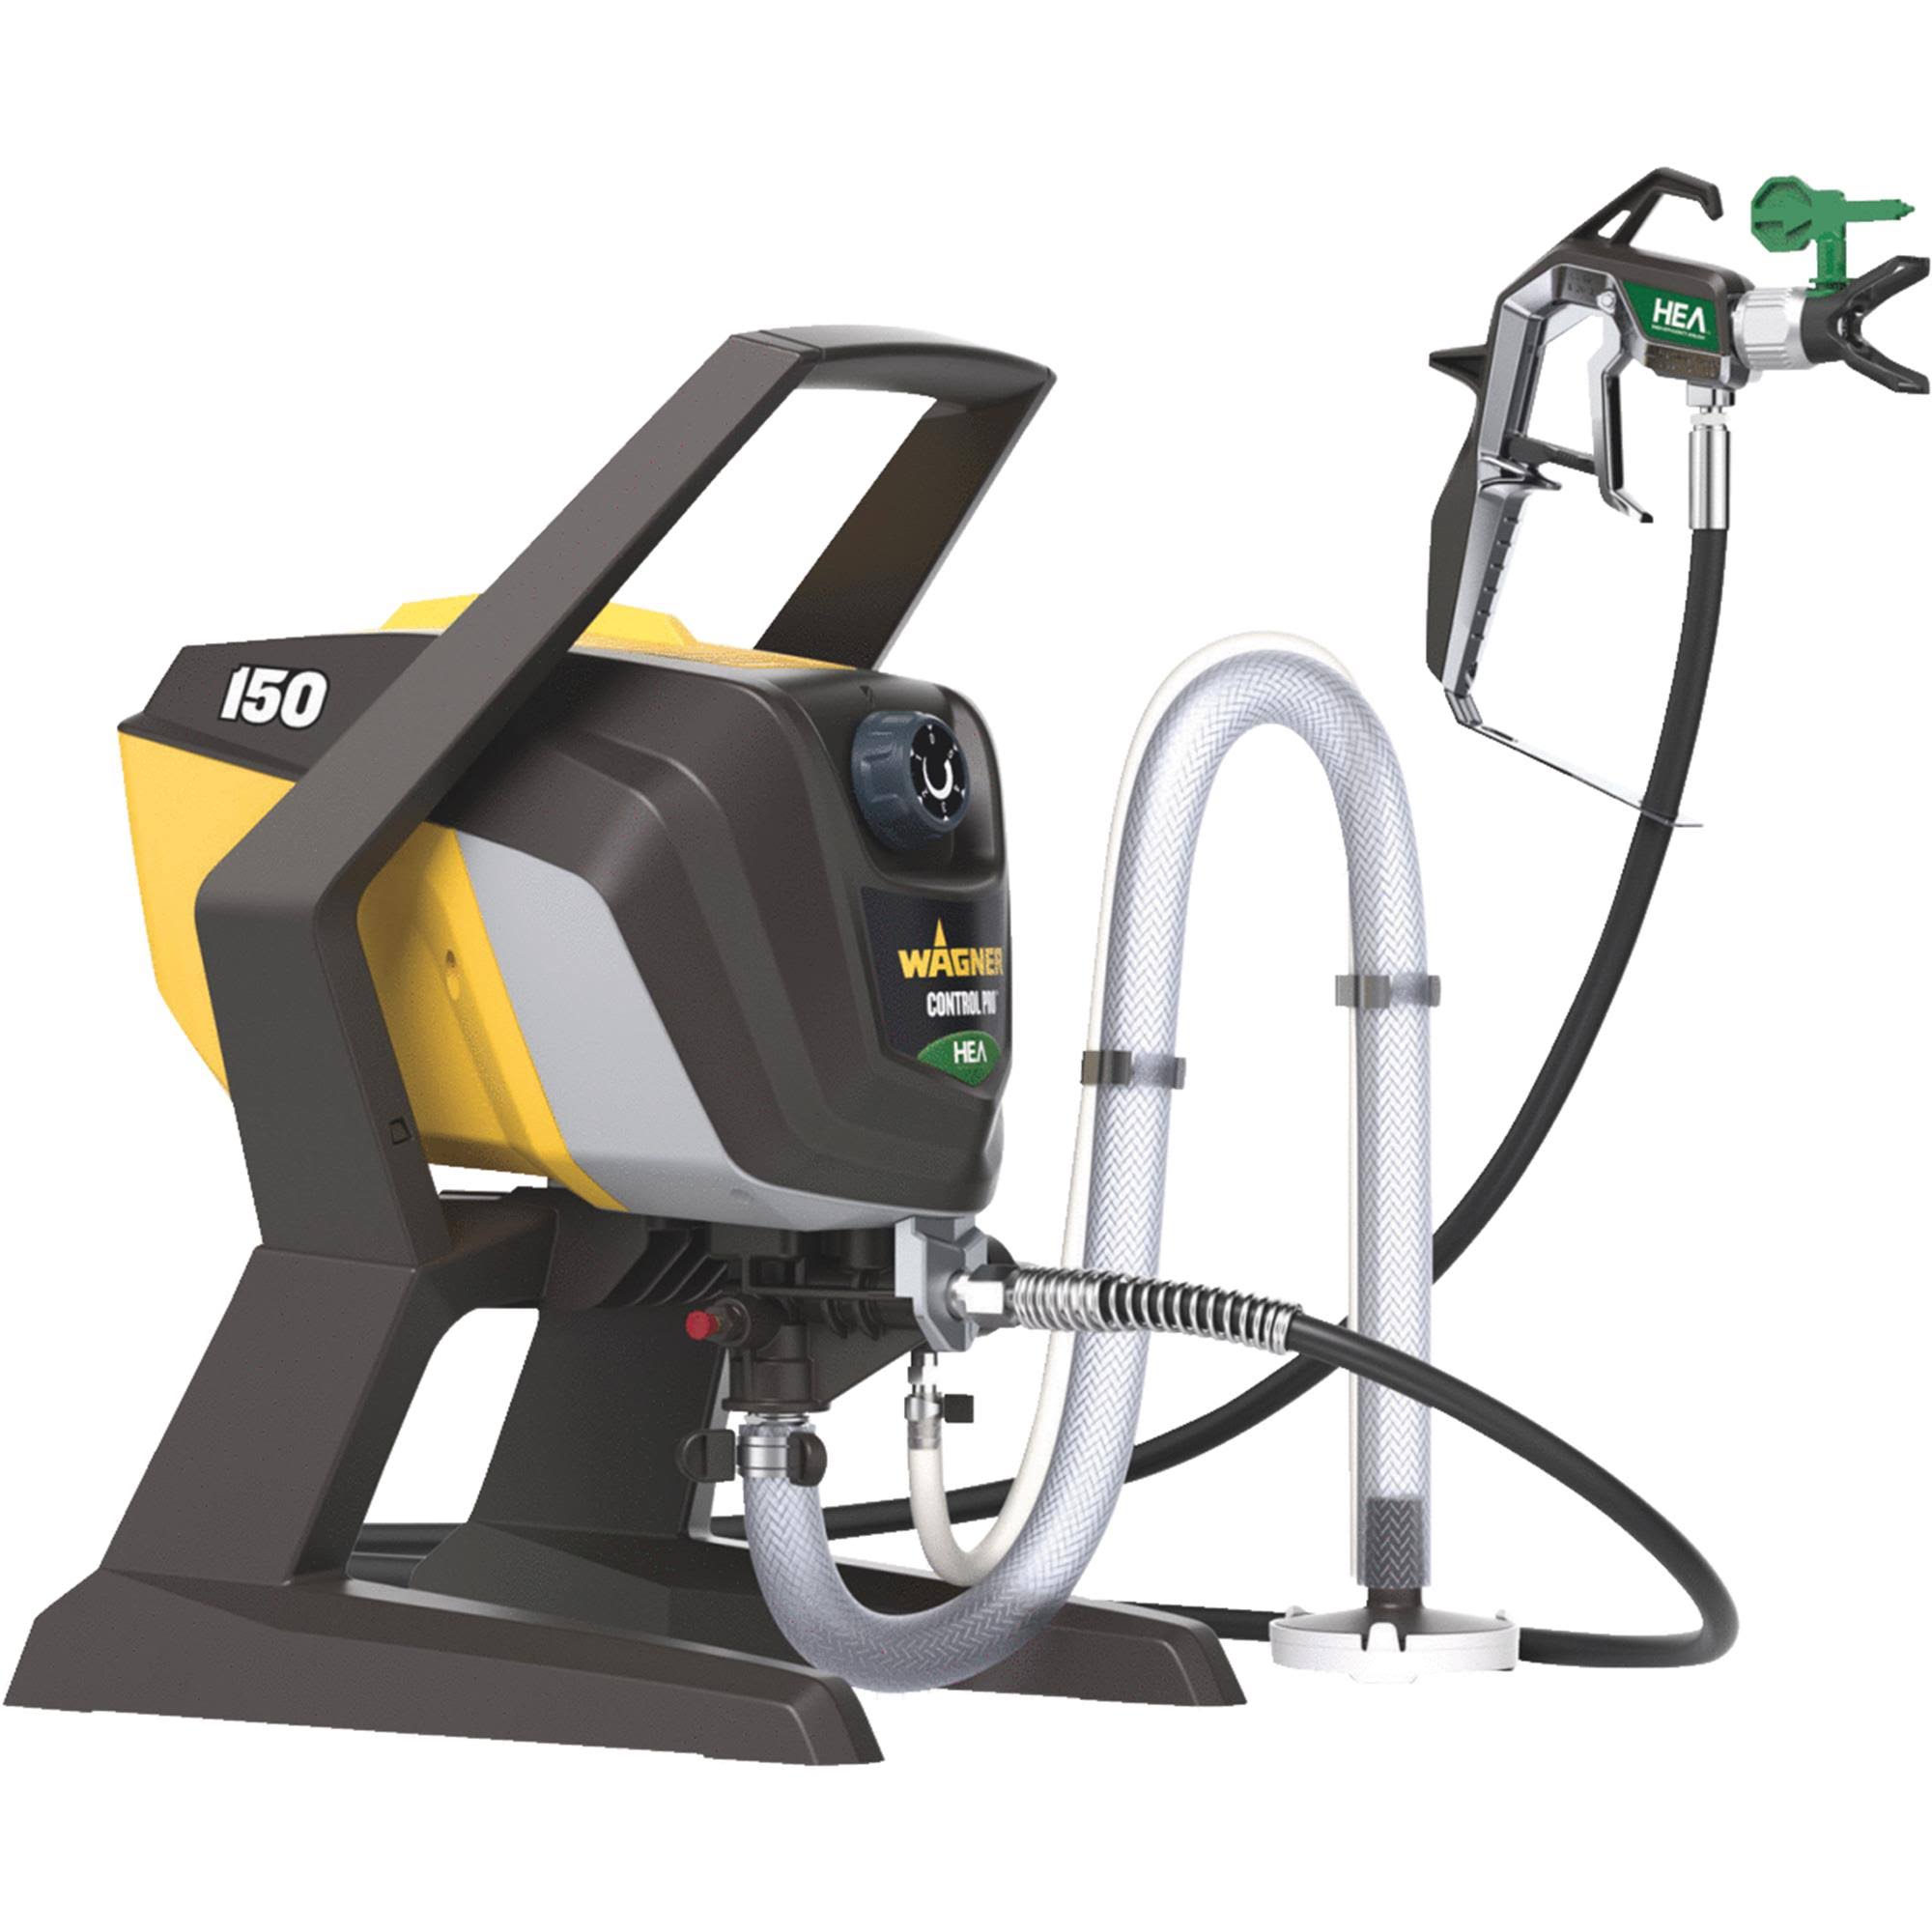 Wagner Control Pro 150 High Efficiency Airless Paint Sprayer